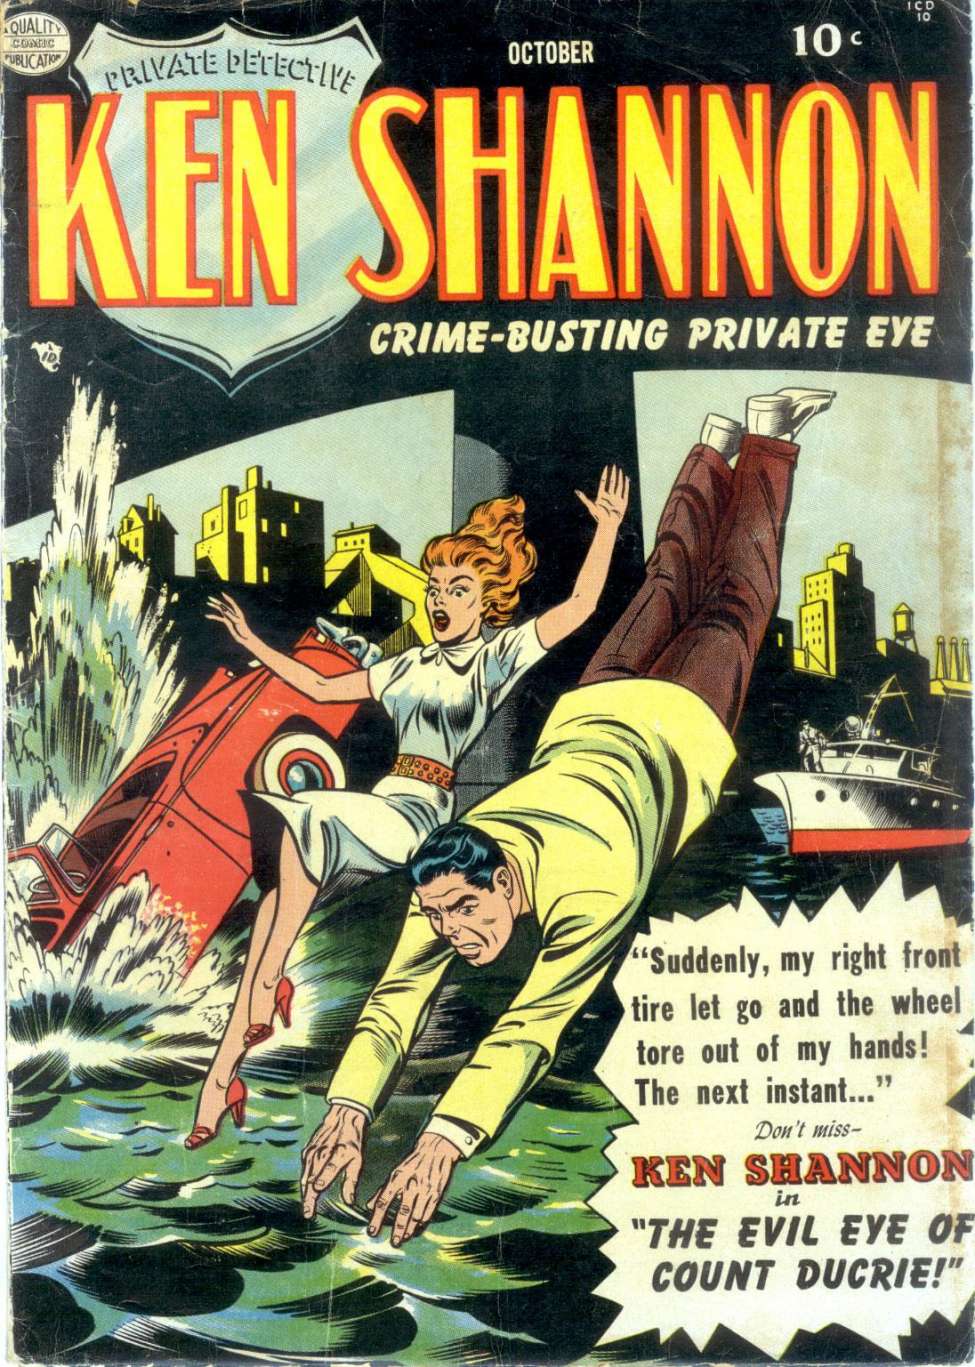 Book Cover For Ken Shannon 1